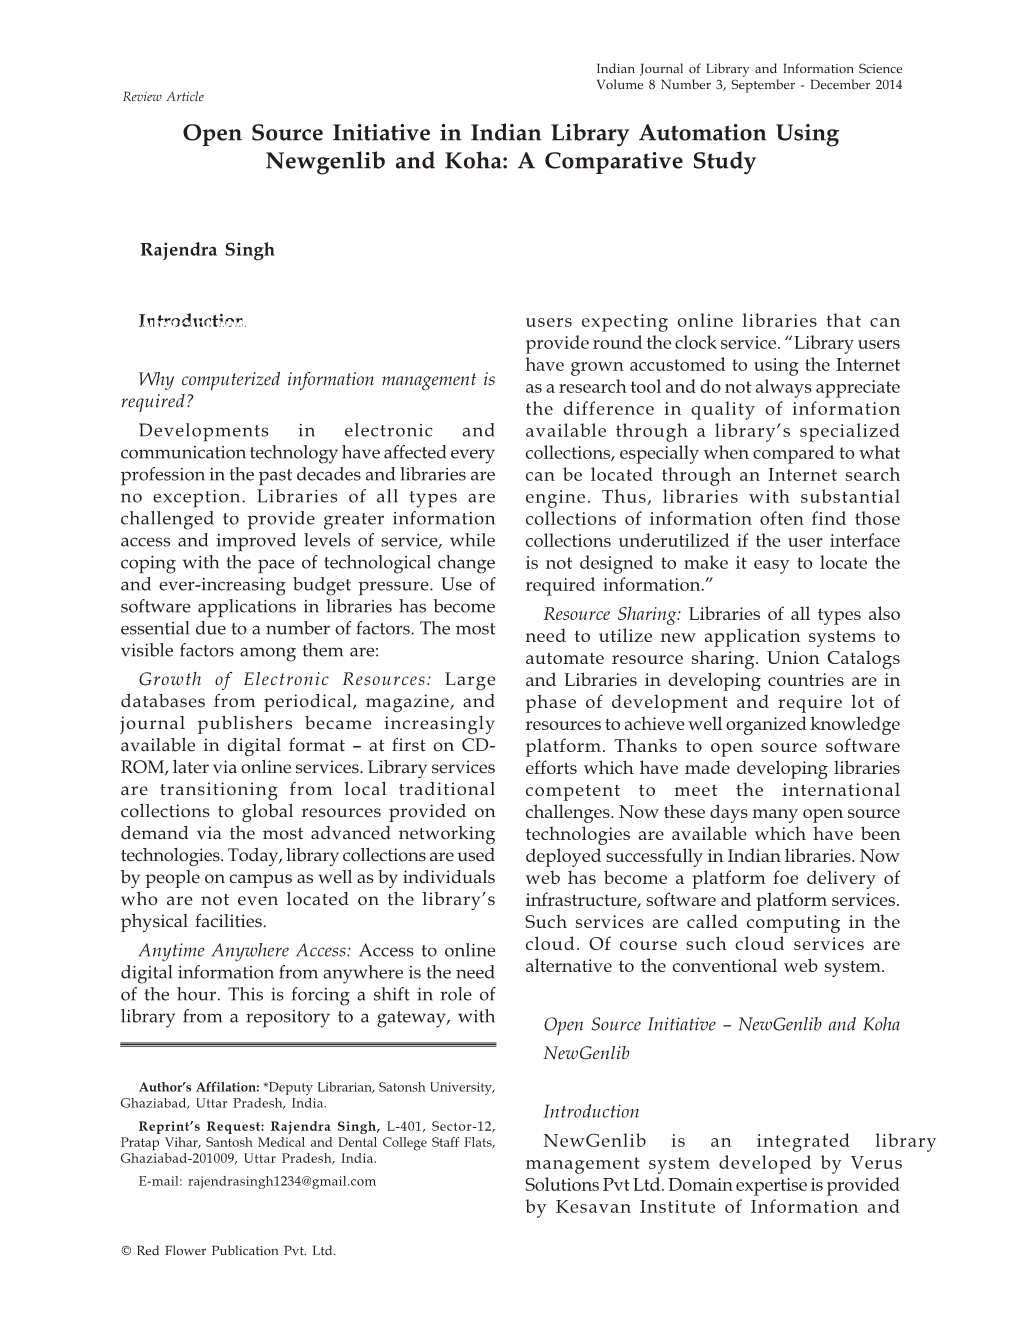 Open Source Initiative in Indian Library Automation Using Newgenlib and Koha: a Comparative Study